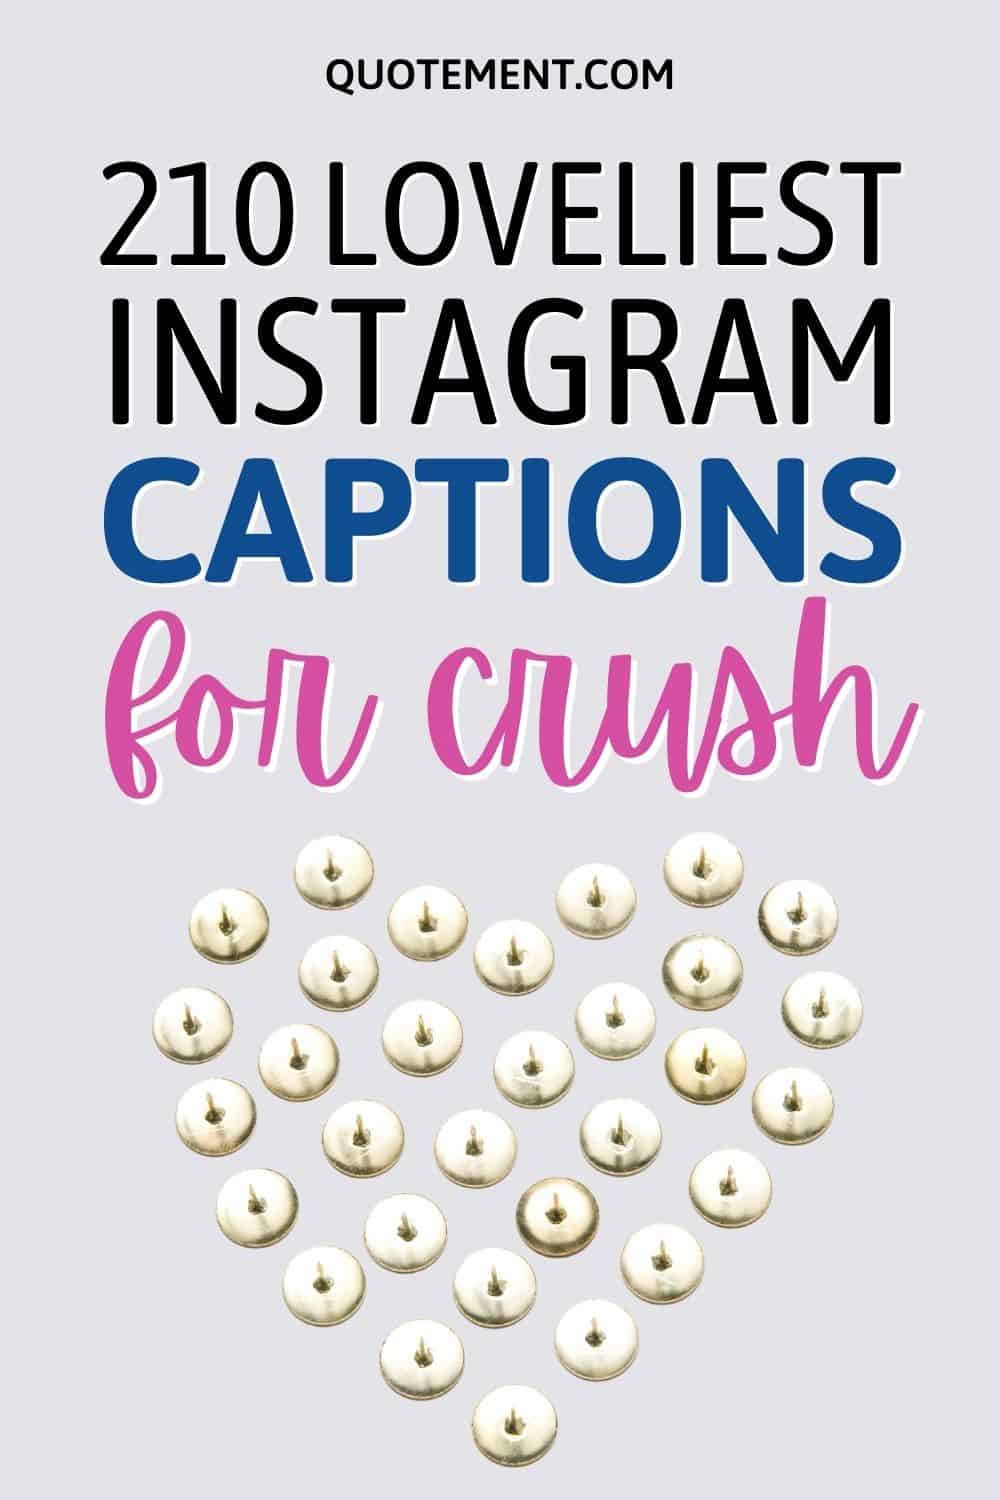 210 Lovely Captions For Crush To Let Them Know How You Feel